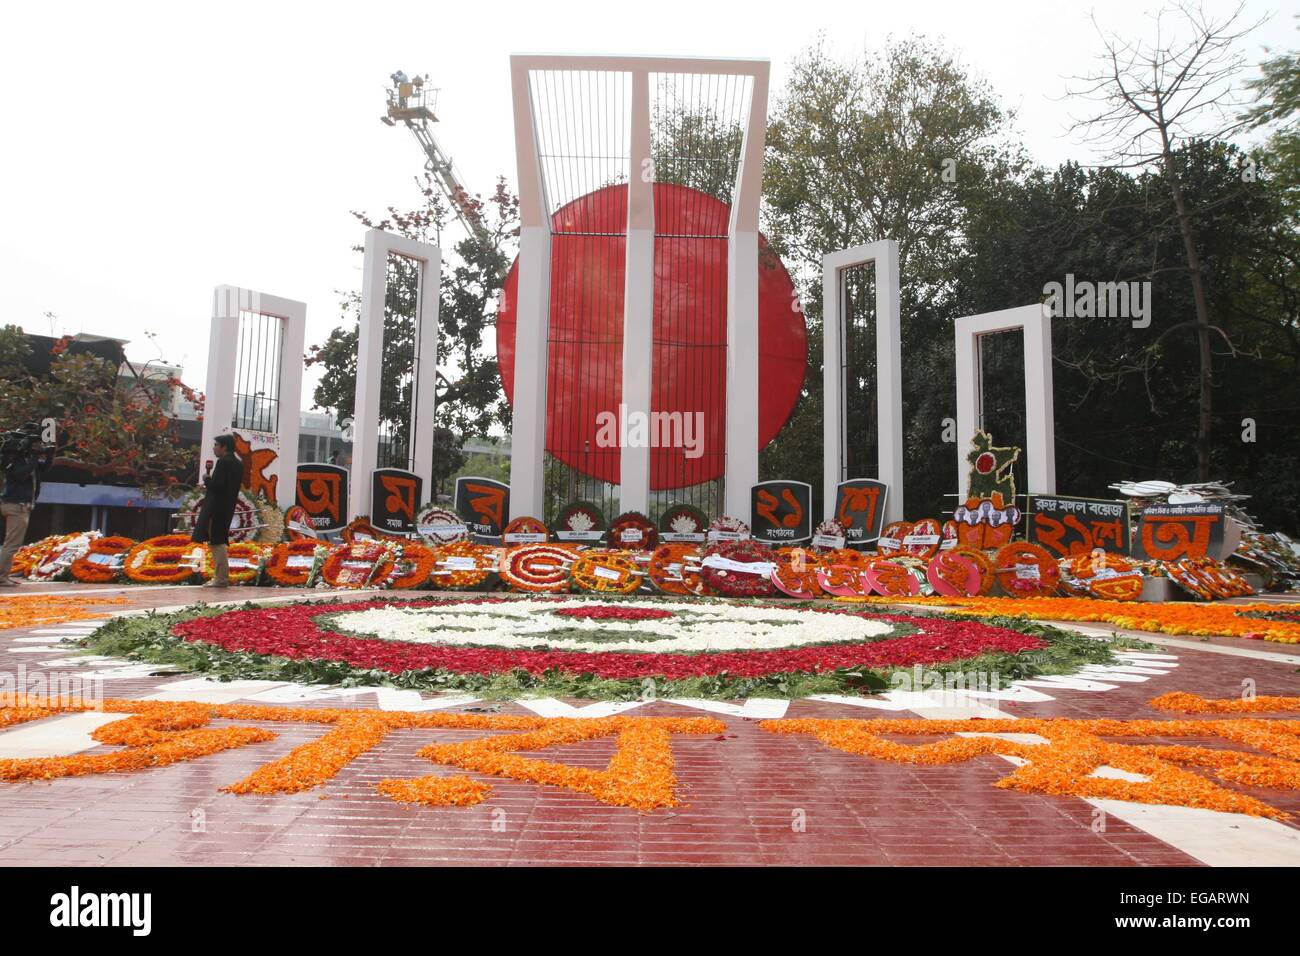 Dhaka, Bangladesh. 21th February 2015. . The martyr’s monument Central Shaheed Minar is decorated with flowers as an homage by thousands of Bangladeshi people during the International Mother Language Day, in Dhaka. The gathering marks 60 years since police fired at thousands of protesters at a university in Bangladesh demanding that Bengali be declared the state language. The deaths marked the start of a nearly two-decades-long struggle for Bangladesh which ended in victory in the 1971 independence war with Pakistan . Stock Photo